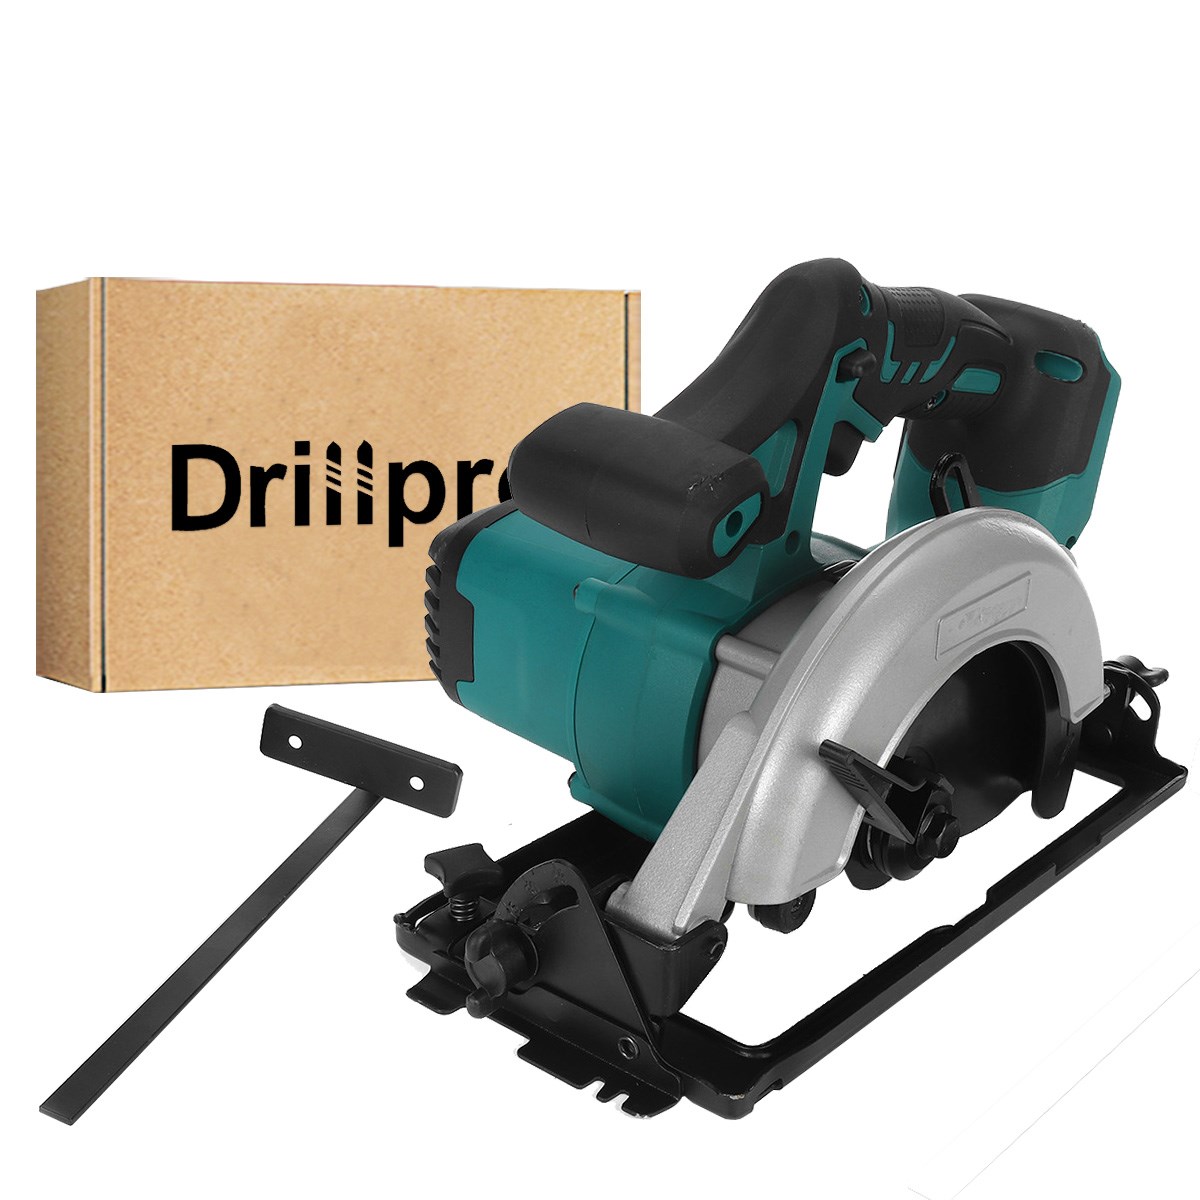 Drillpro-Electric-Circular-Saw-6Inch152mm-Power-Tools-3800RPM-Multifunction-Cutting-Machine-For-18V--1744309-11